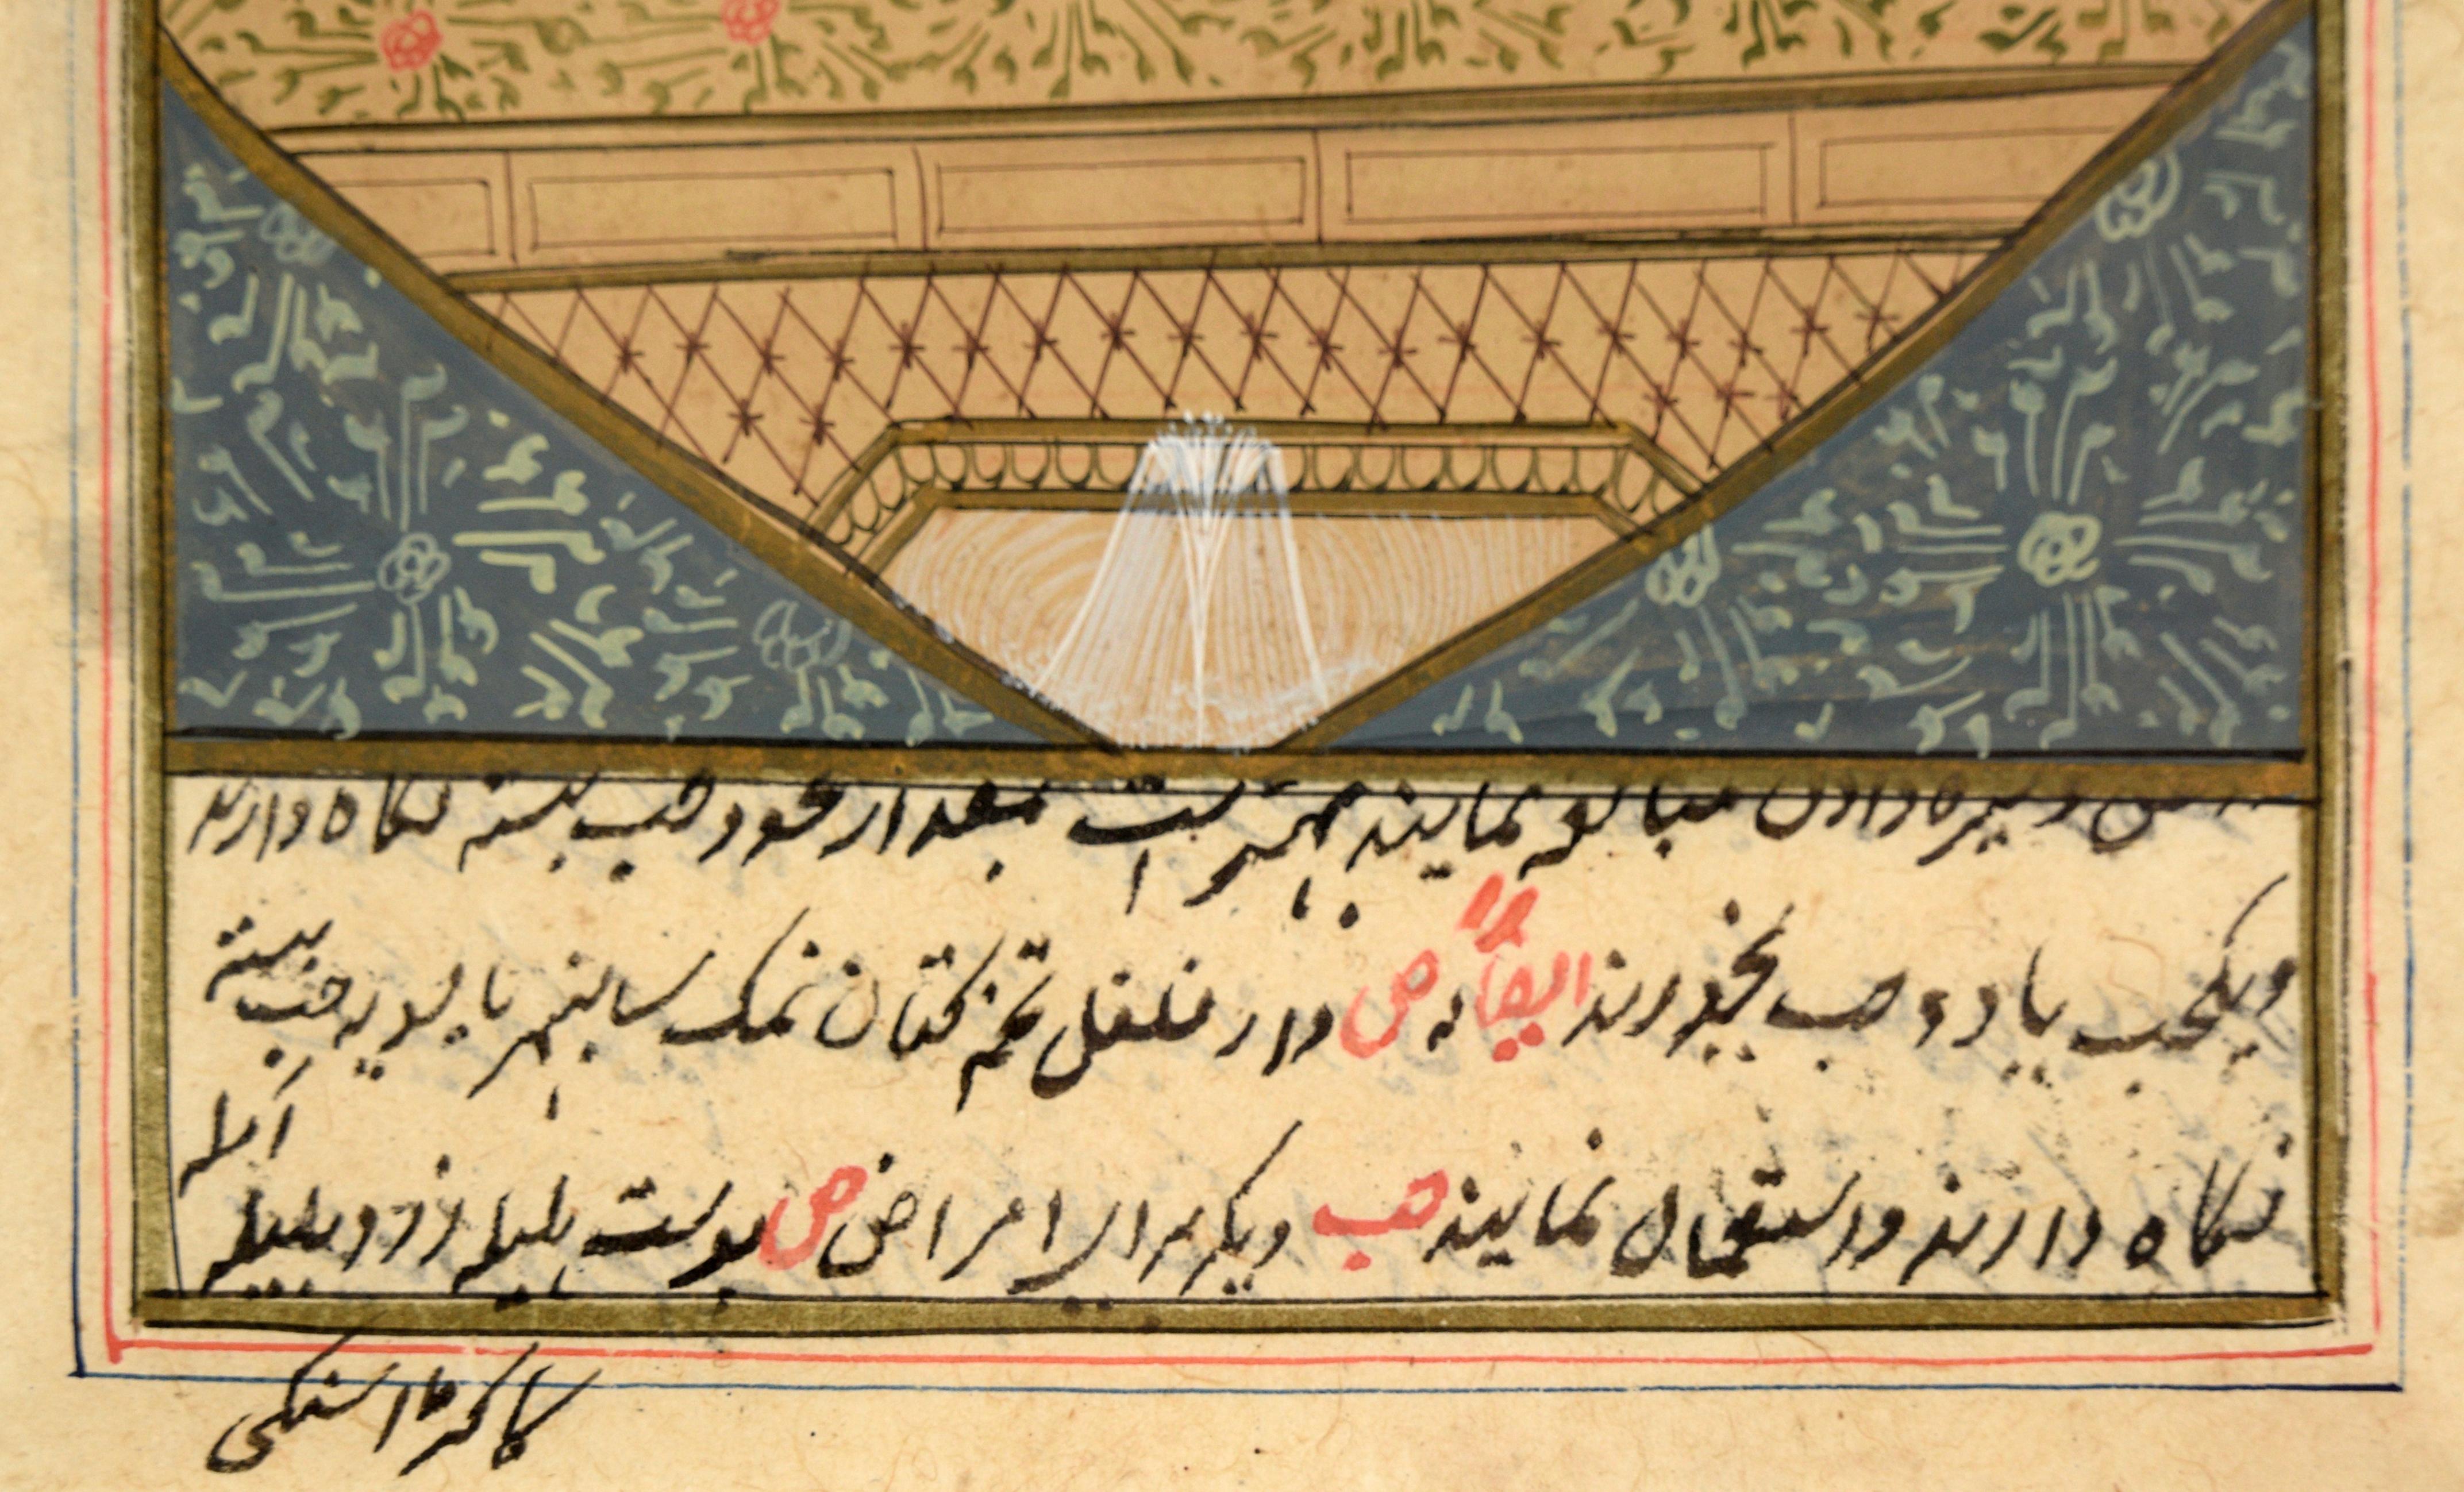 Gold Leaf Persian Manuscript Page, Illustrated in the Safavid Style